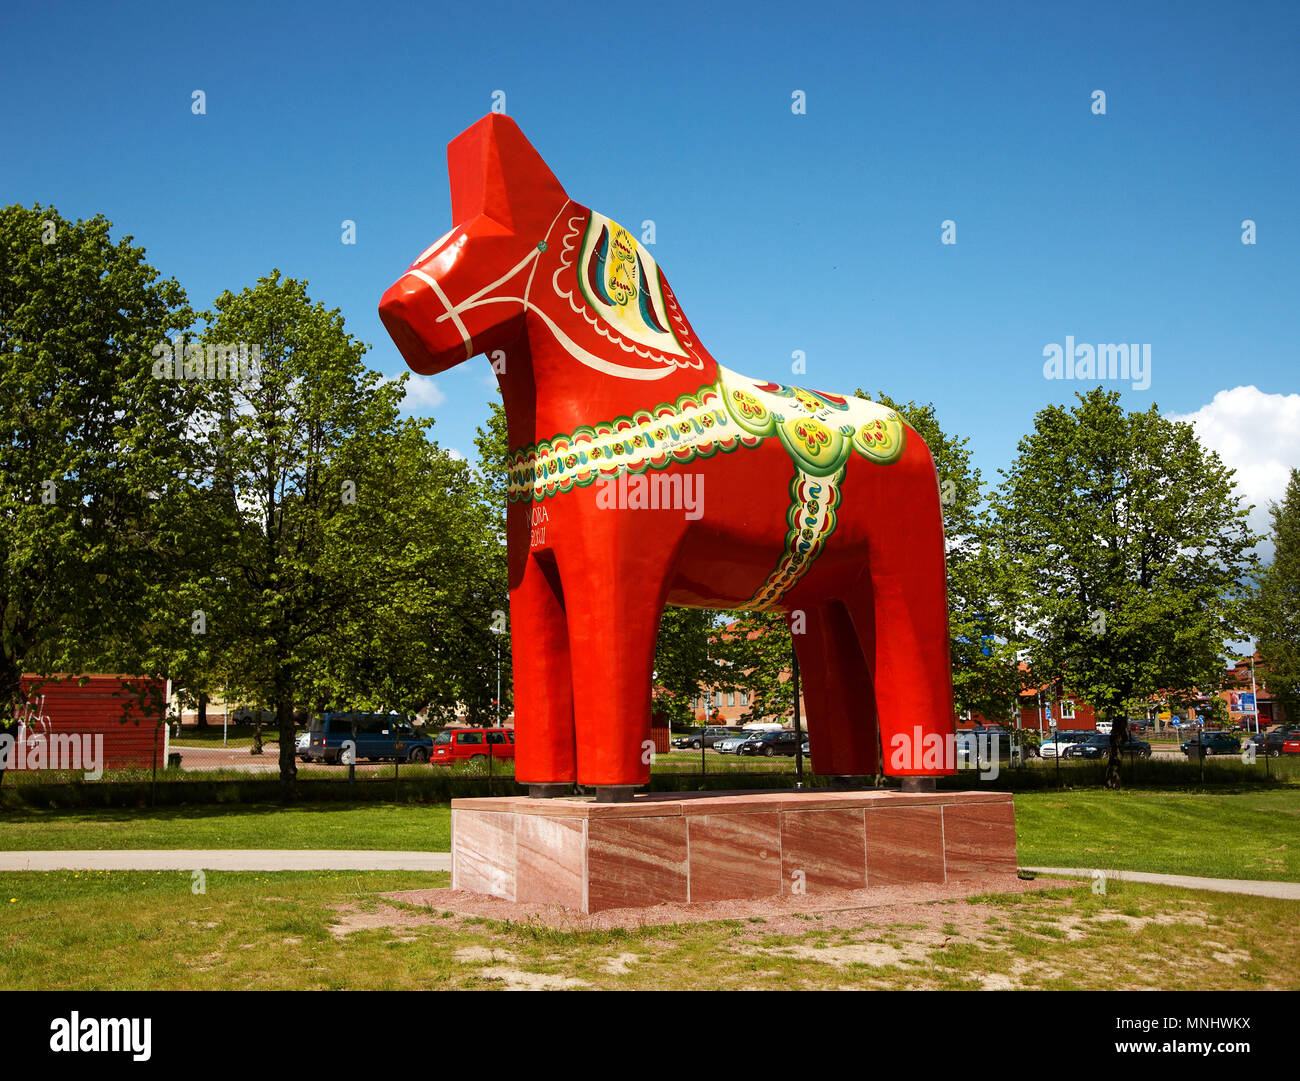 Mora, Sweden - June 7, 2012: A wood sculpture of a dalecarlian horse (wooden horse), traditionally painted and decorated. The dalecarlian horse is a s Stock Photo